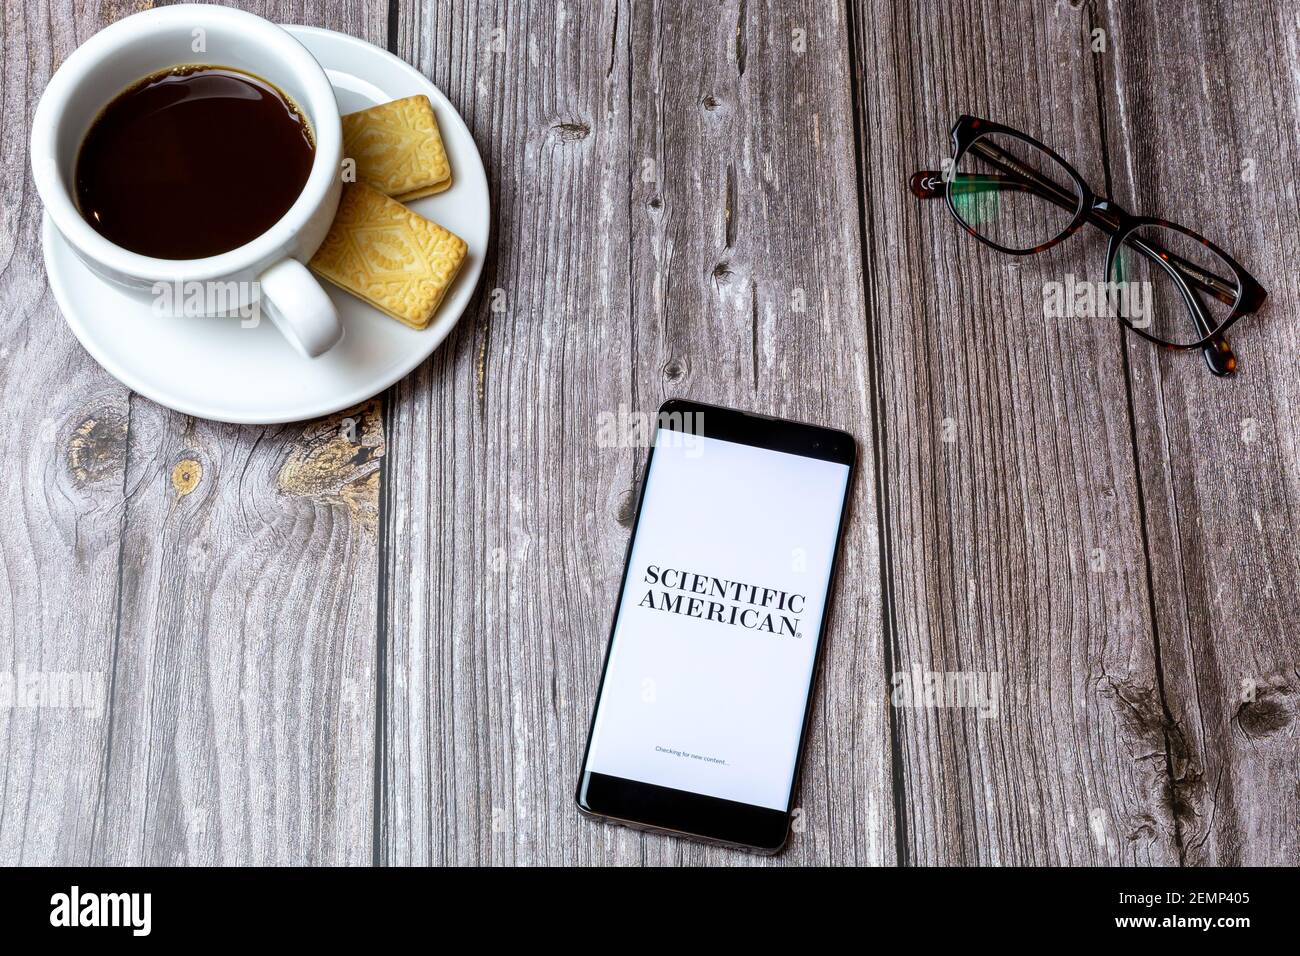 A mobile phone or cell phone on a wooden table with the Scientific American app open next to a coffee and glasses Stock Photo